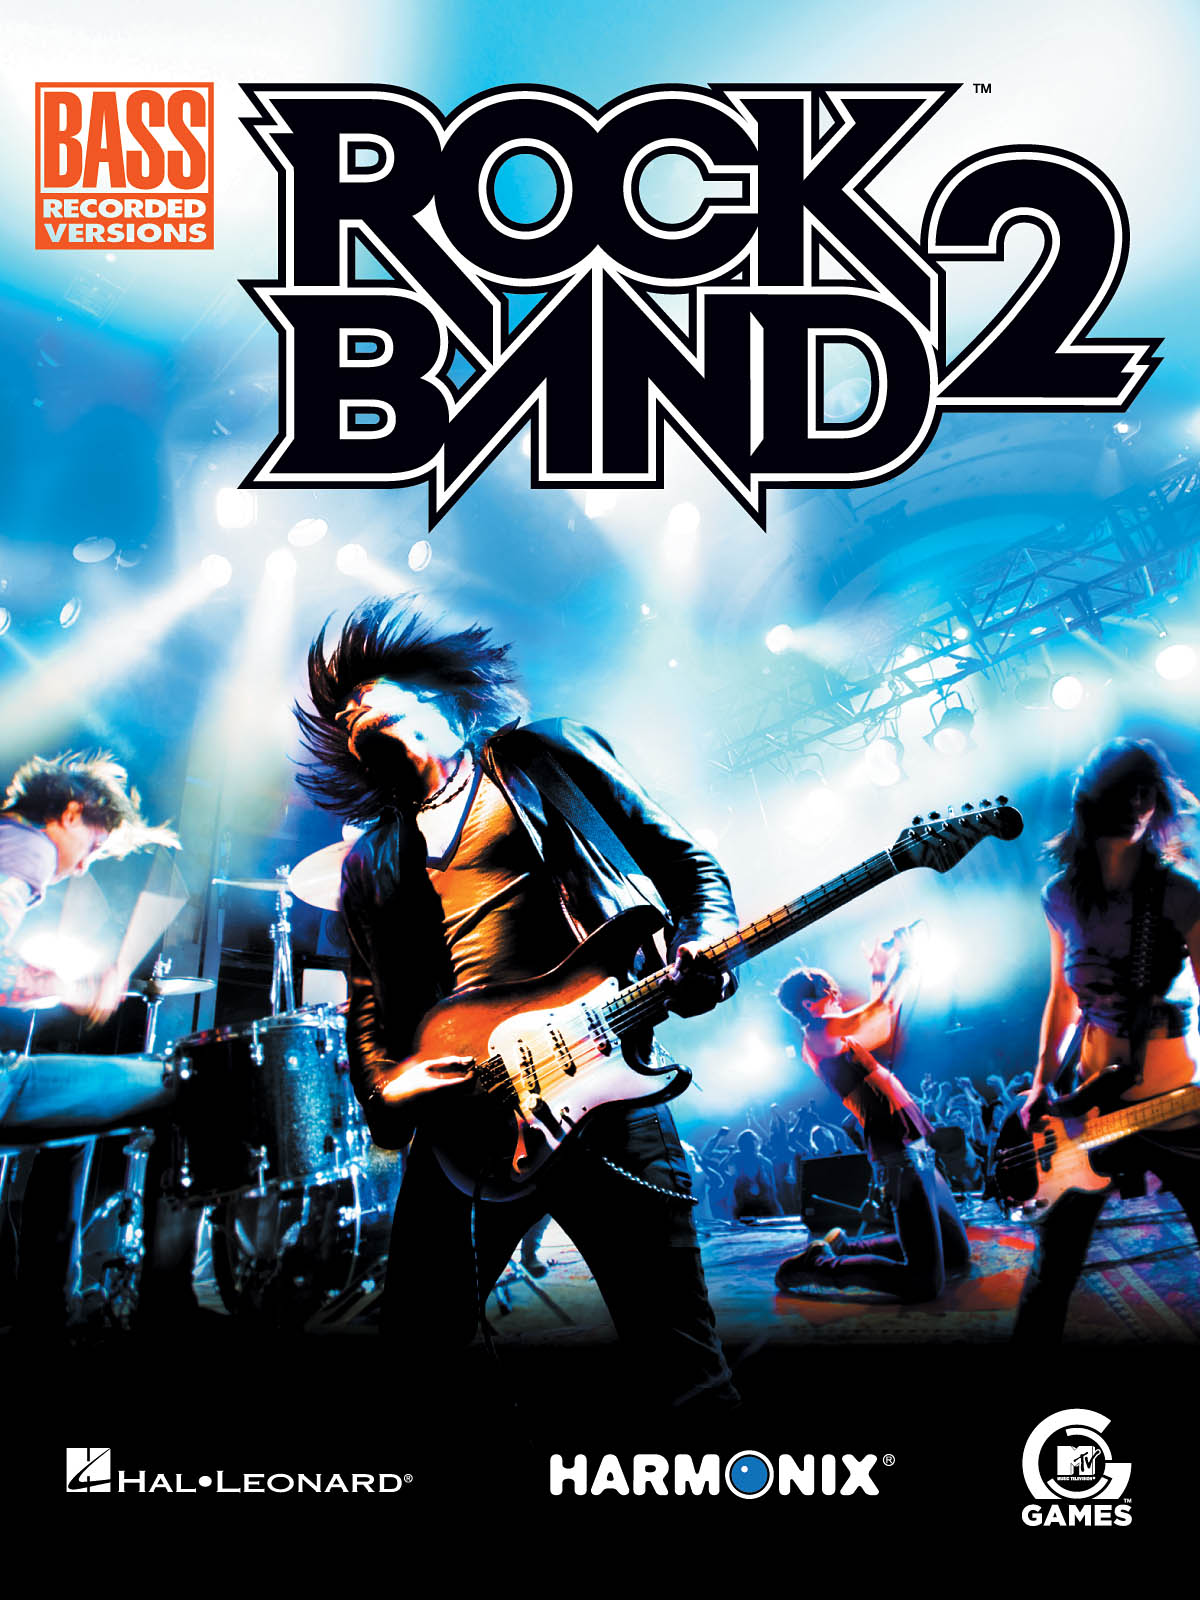 Rock Band 2 - Bass Recorded Versions: Bass Guitar Solo: Instrumental Album